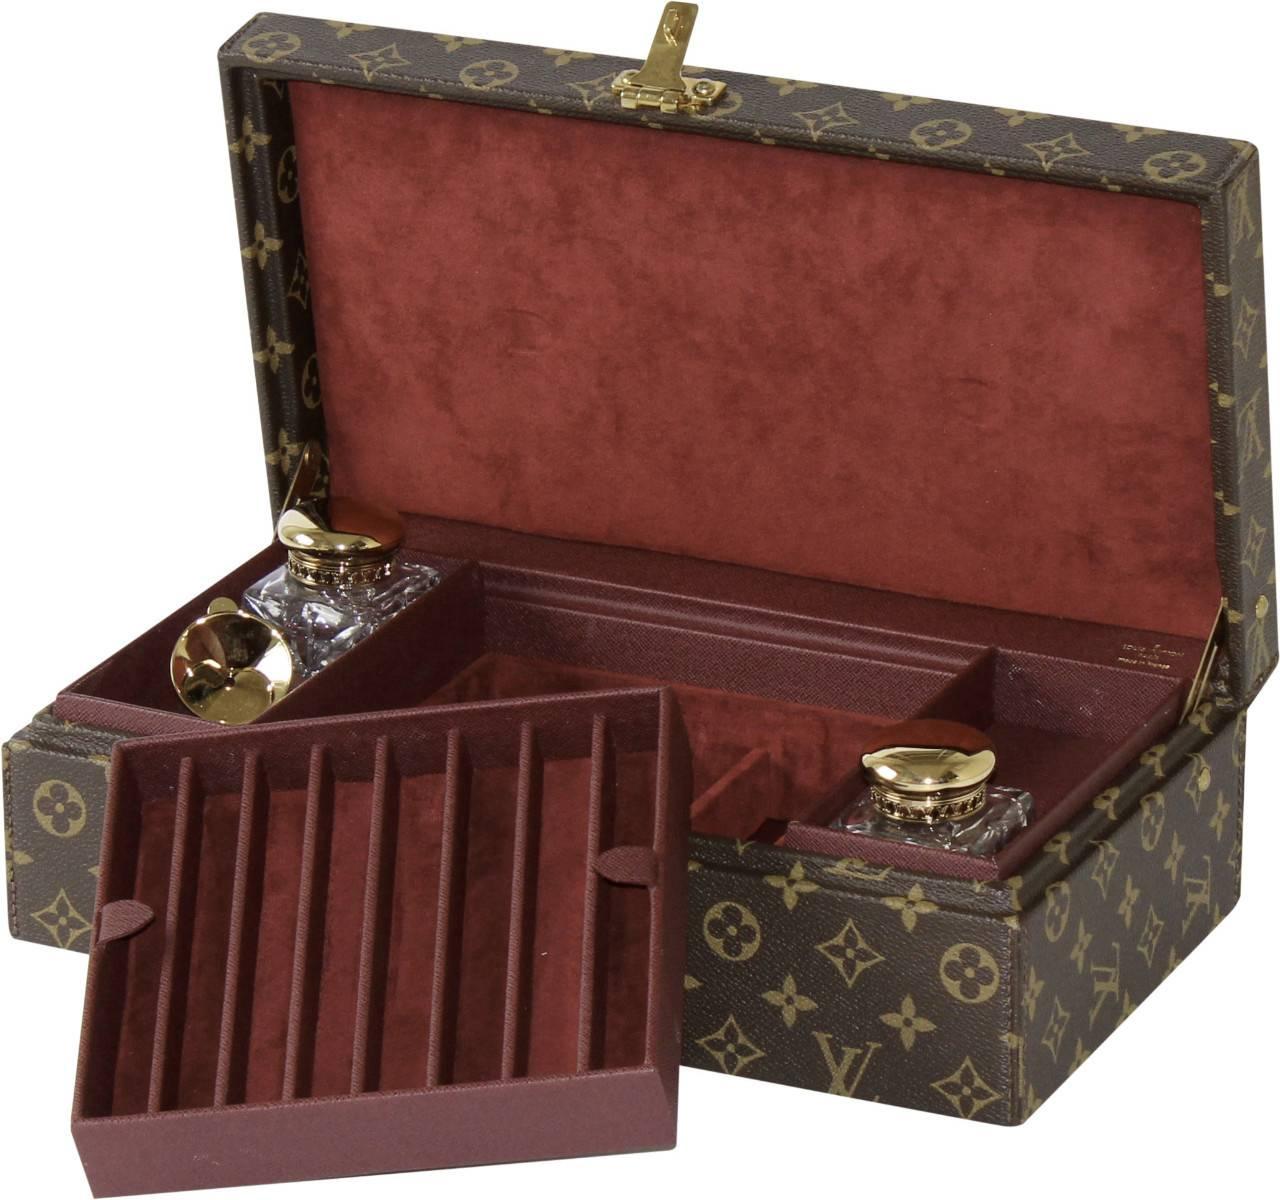 A custom-made piece from Paris, this incredible writing set is complete with two crystal ink wells from the famed St Louis crystal designer. 

Finished in LV monogram exterior with a stunning maroon interior and adorned with brass hardware.